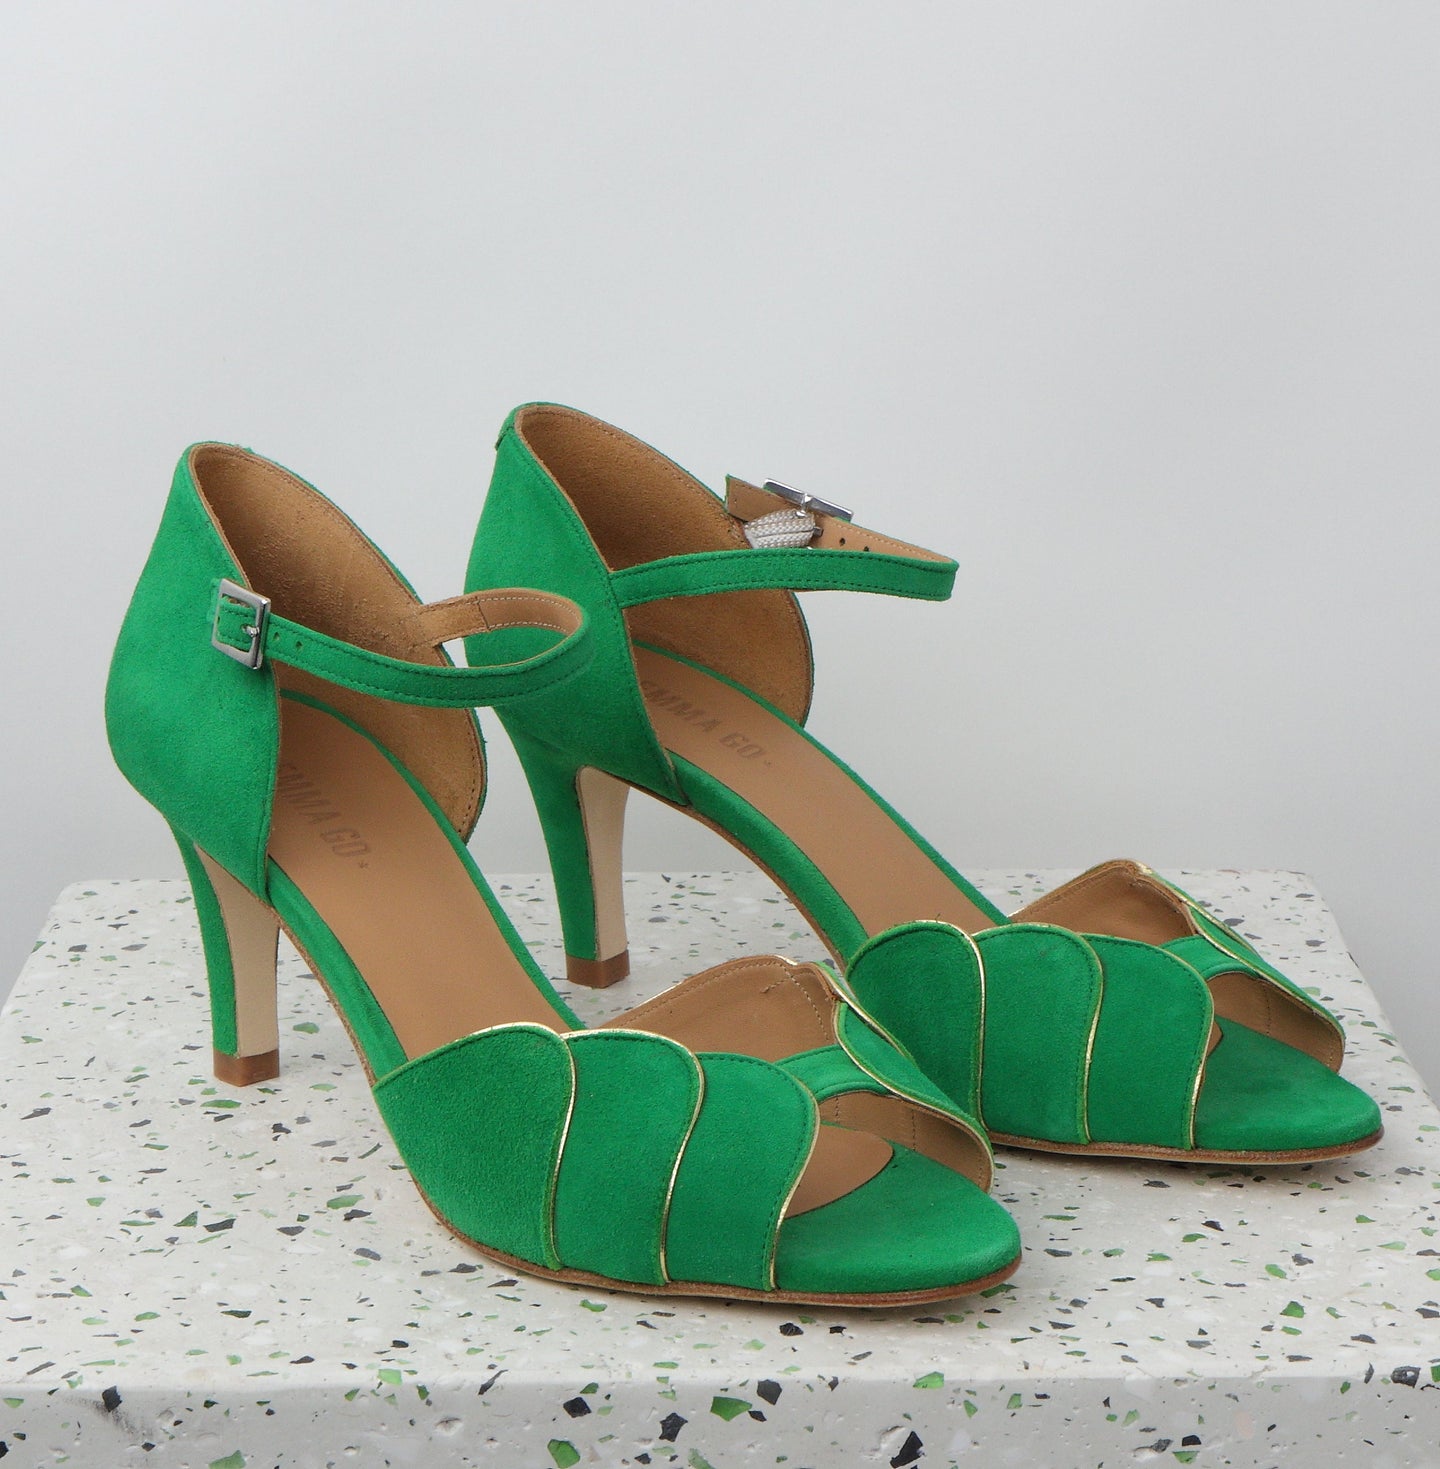 PHOEBE Suede Bright Green & Nappa Gold